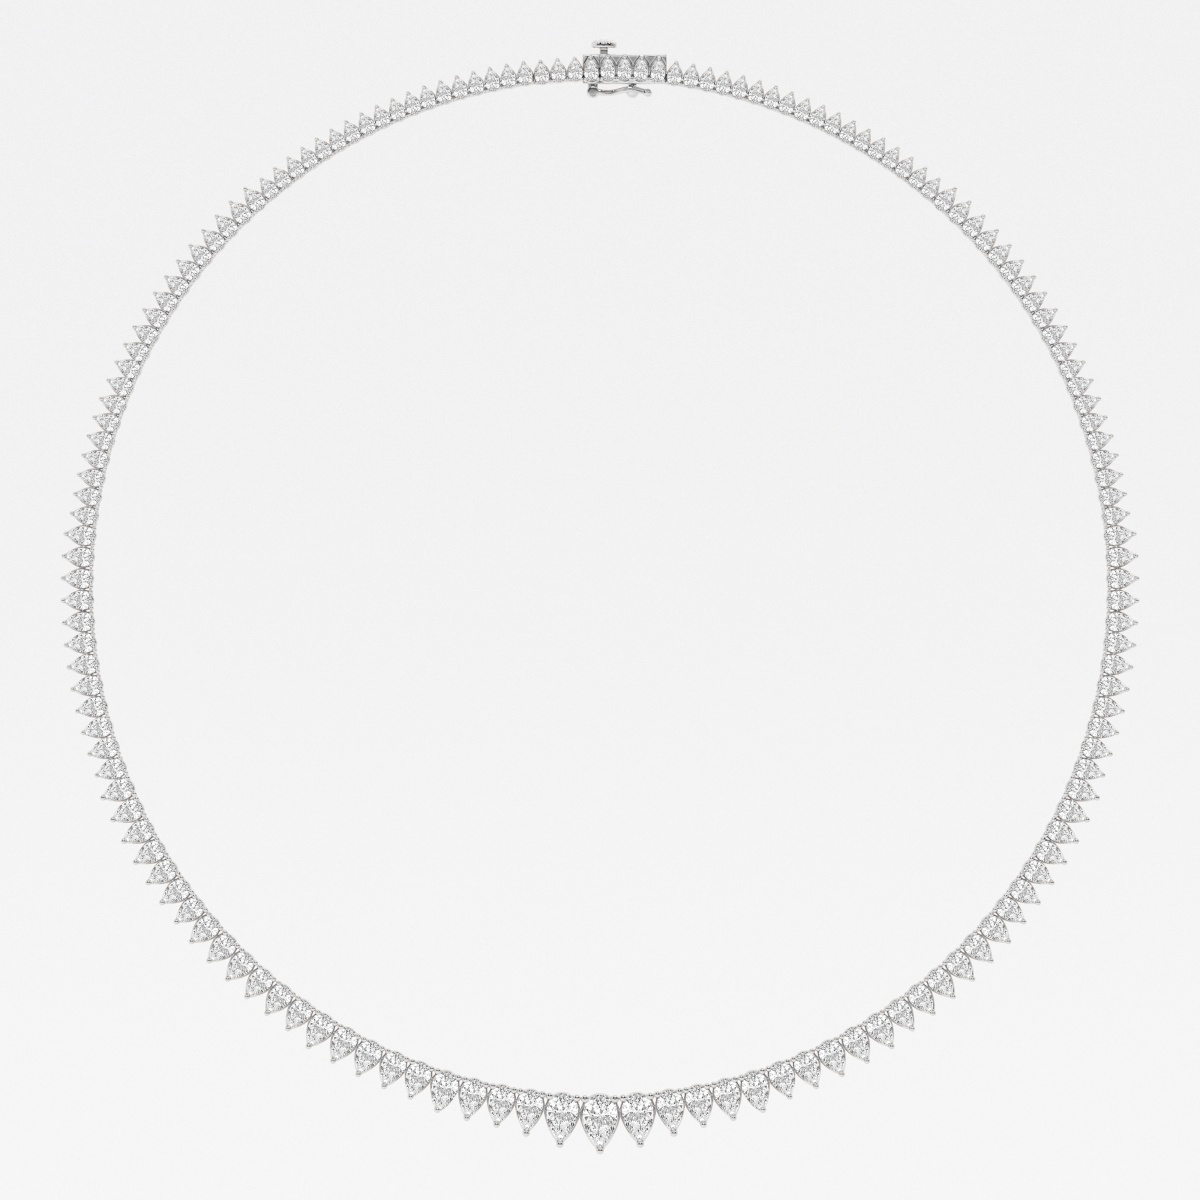 Additional Image 1 for  16 1/2 ctw Pear Lab Grown Diamond Graduated Tennis Necklace